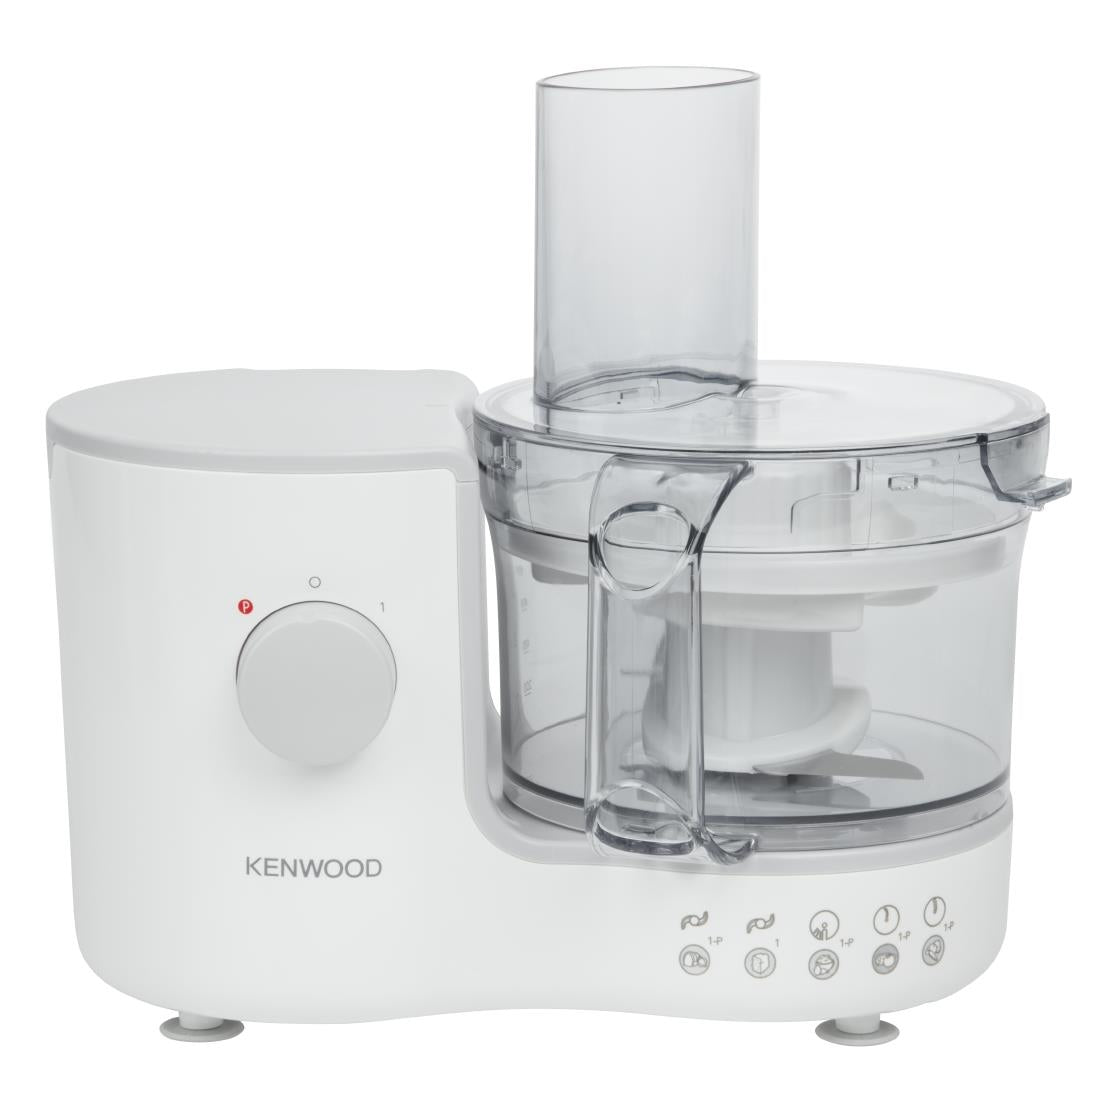 FR194 Kenwood Compact Food processor FP120A JD Catering Equipment Solutions Ltd